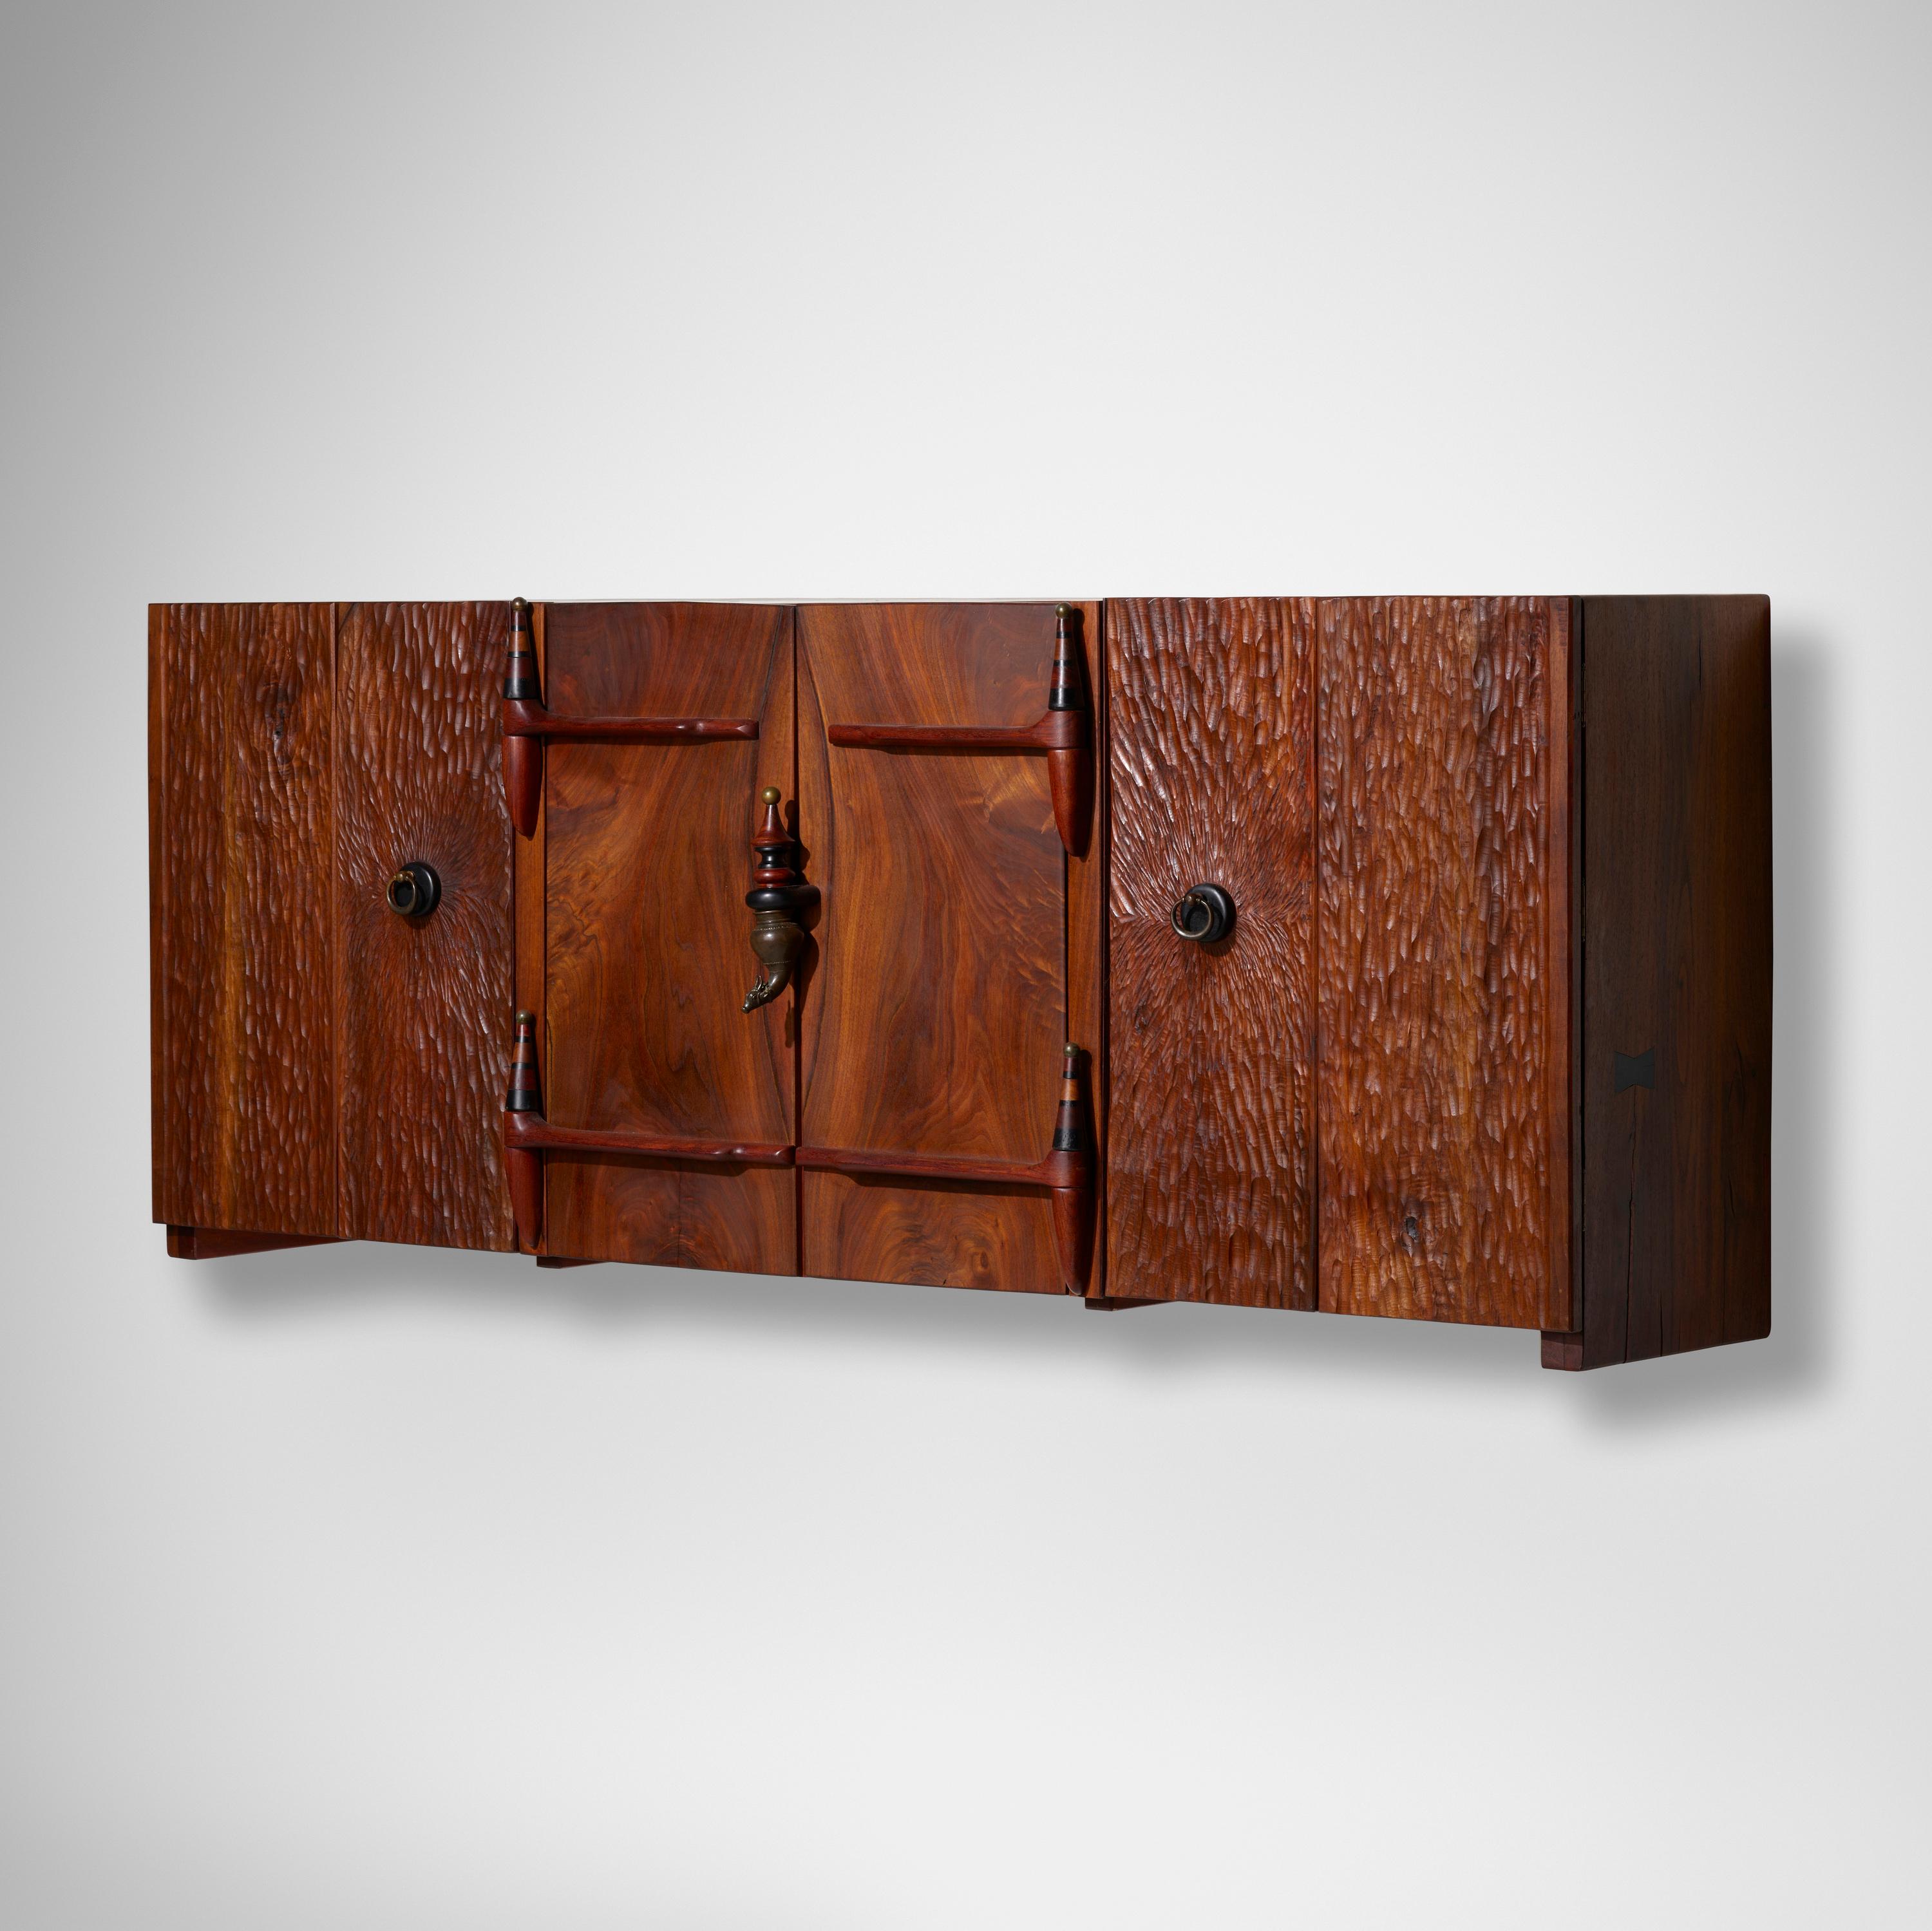 Phillip Lloyd Powell: Wall-Mounted Cabinet. Cabinet features 17th century finials and four doors (two bi-fold) concealing three adjustable shelves.

USA, c. 1995
Walnut, cocobolo, ebony, patinated metal, painted wood
30½ h × 78 w × 17 d in

